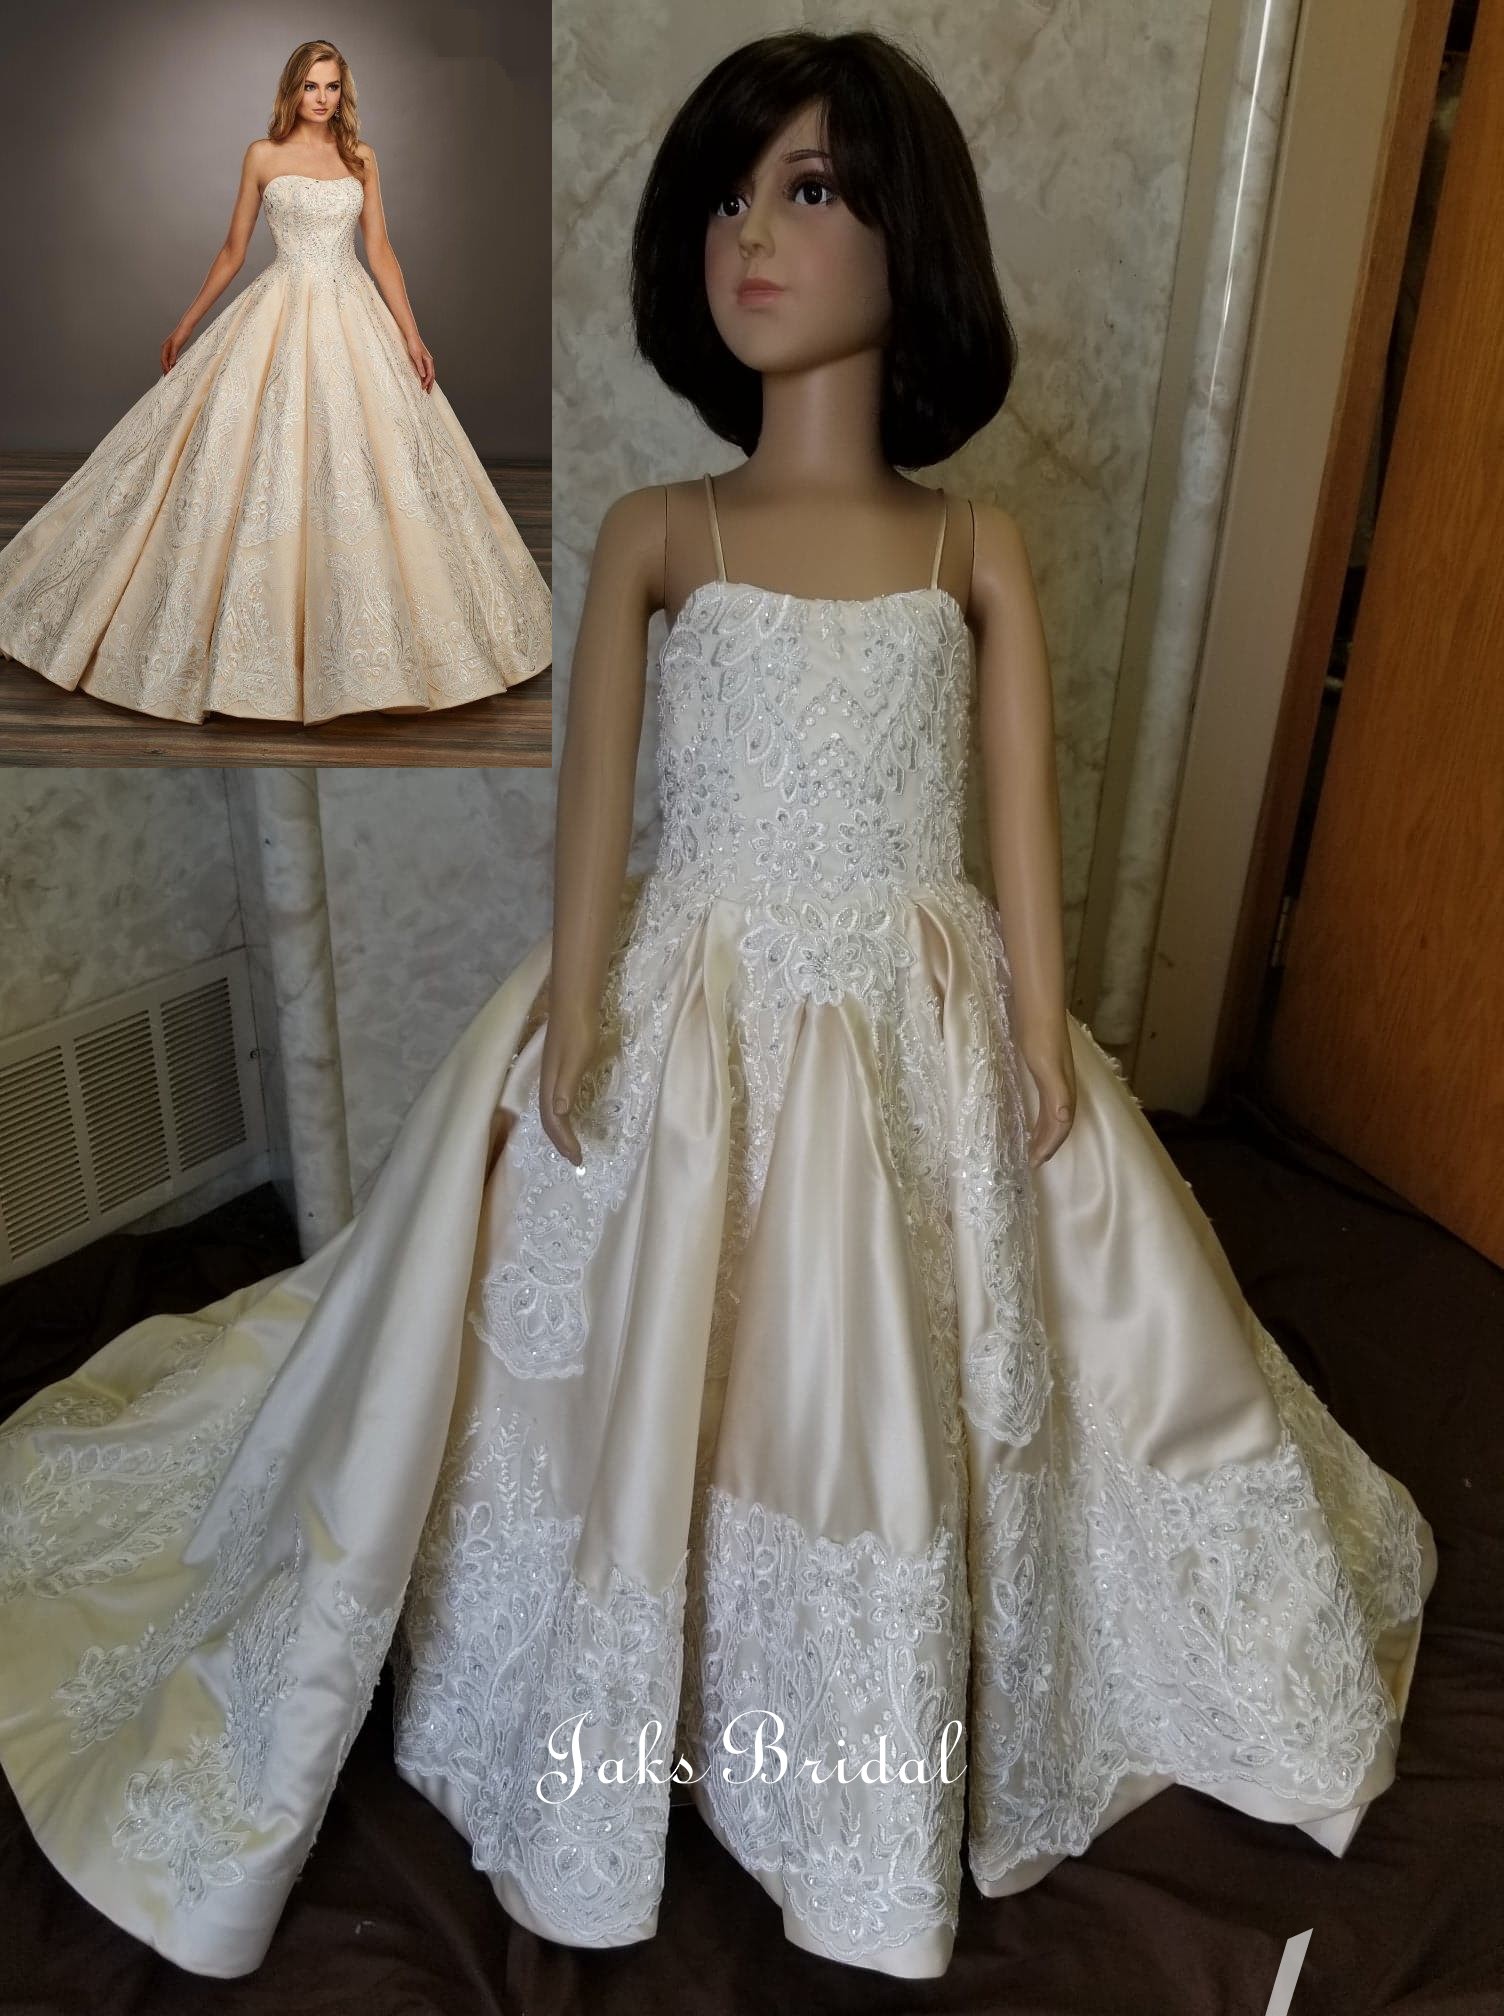 flower girl dress shown with inspired bridal gown